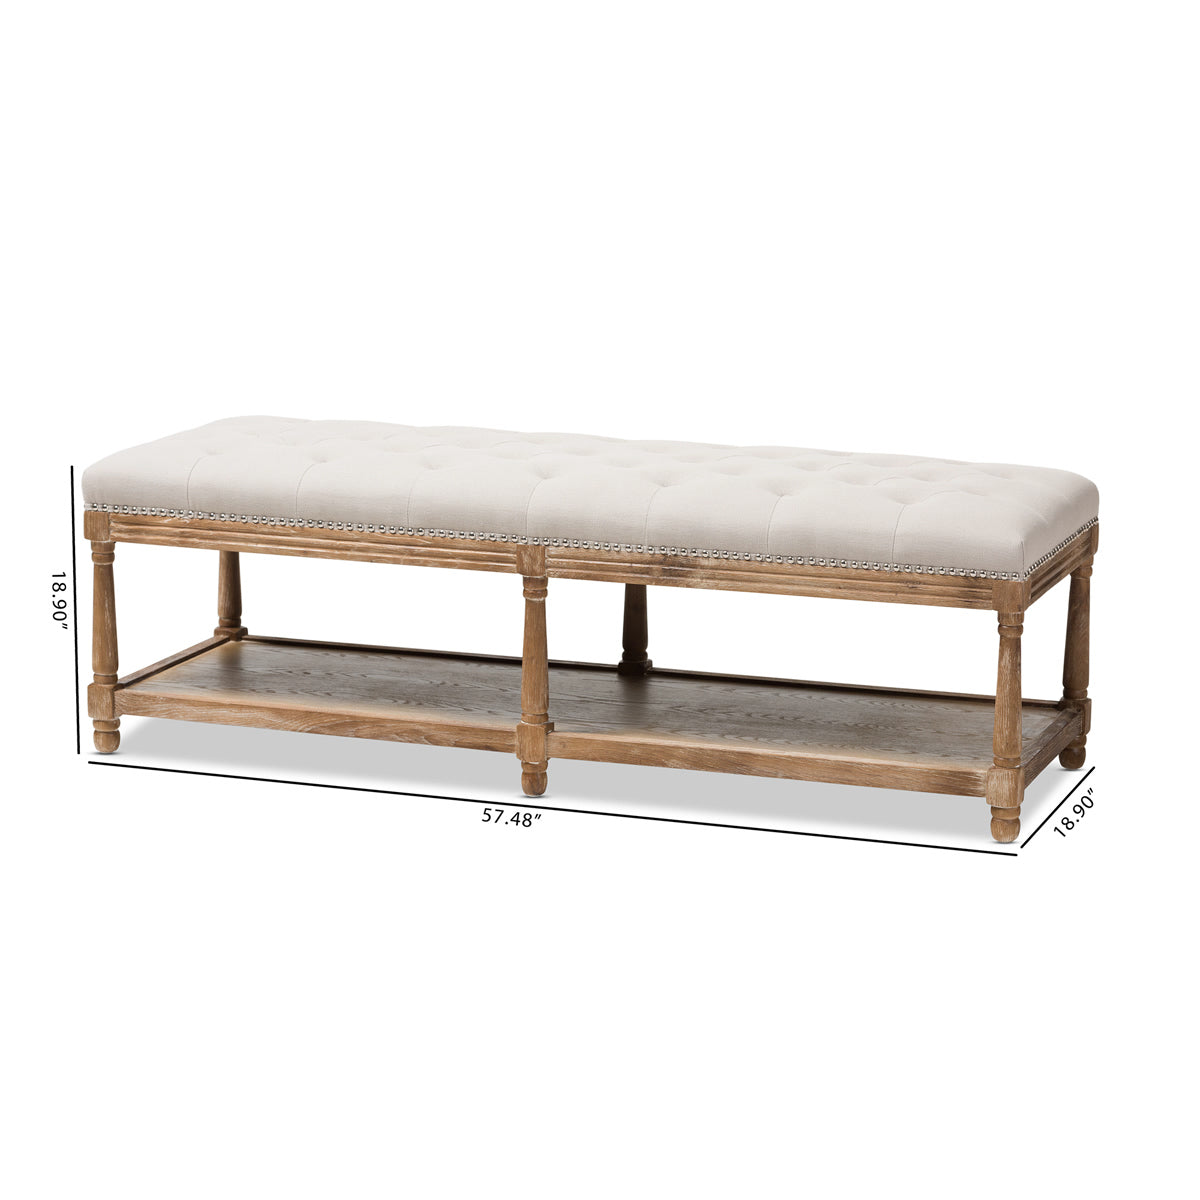 Baxton Studio Celeste French Country Weathered Oak Beige Linen Upholstered Ottoman Bench Baxton Studio-benches-Minimal And Modern - 8